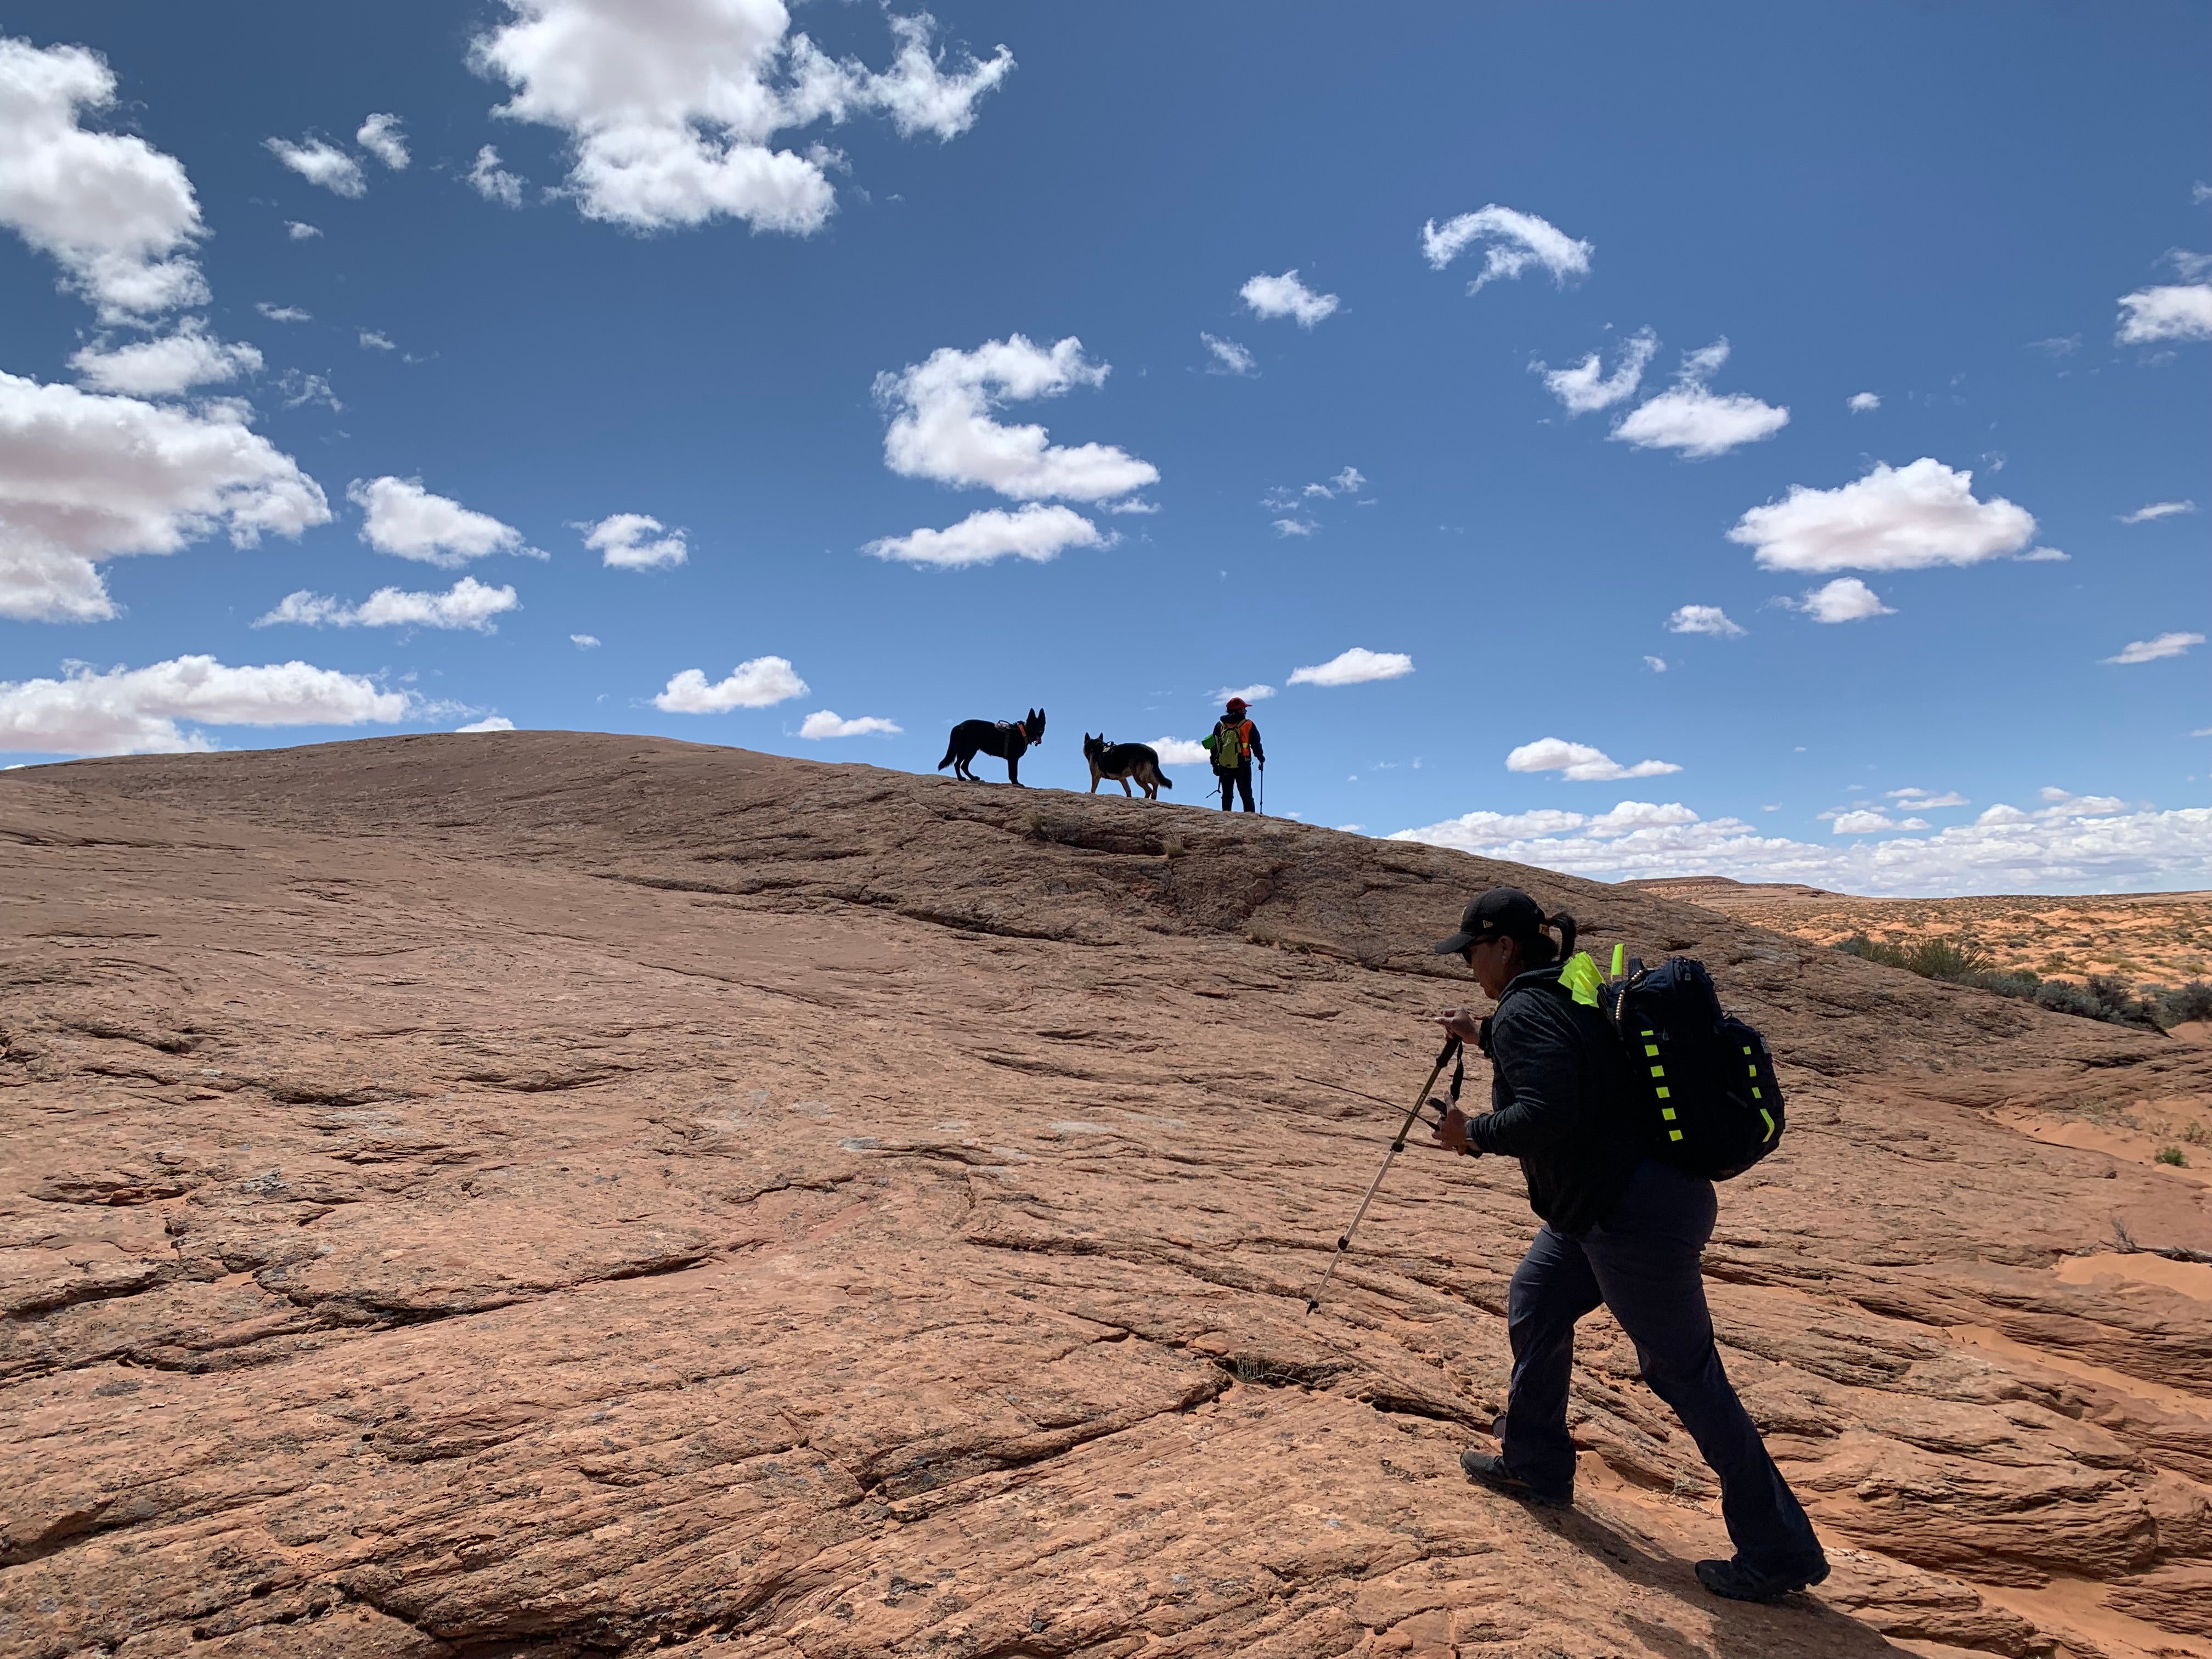 Bernadine Beyale, founder of Four Corners K9 Search and Rescue, is seen during a search for a missing person on the Navajo Nation on April 23rd, 2022.